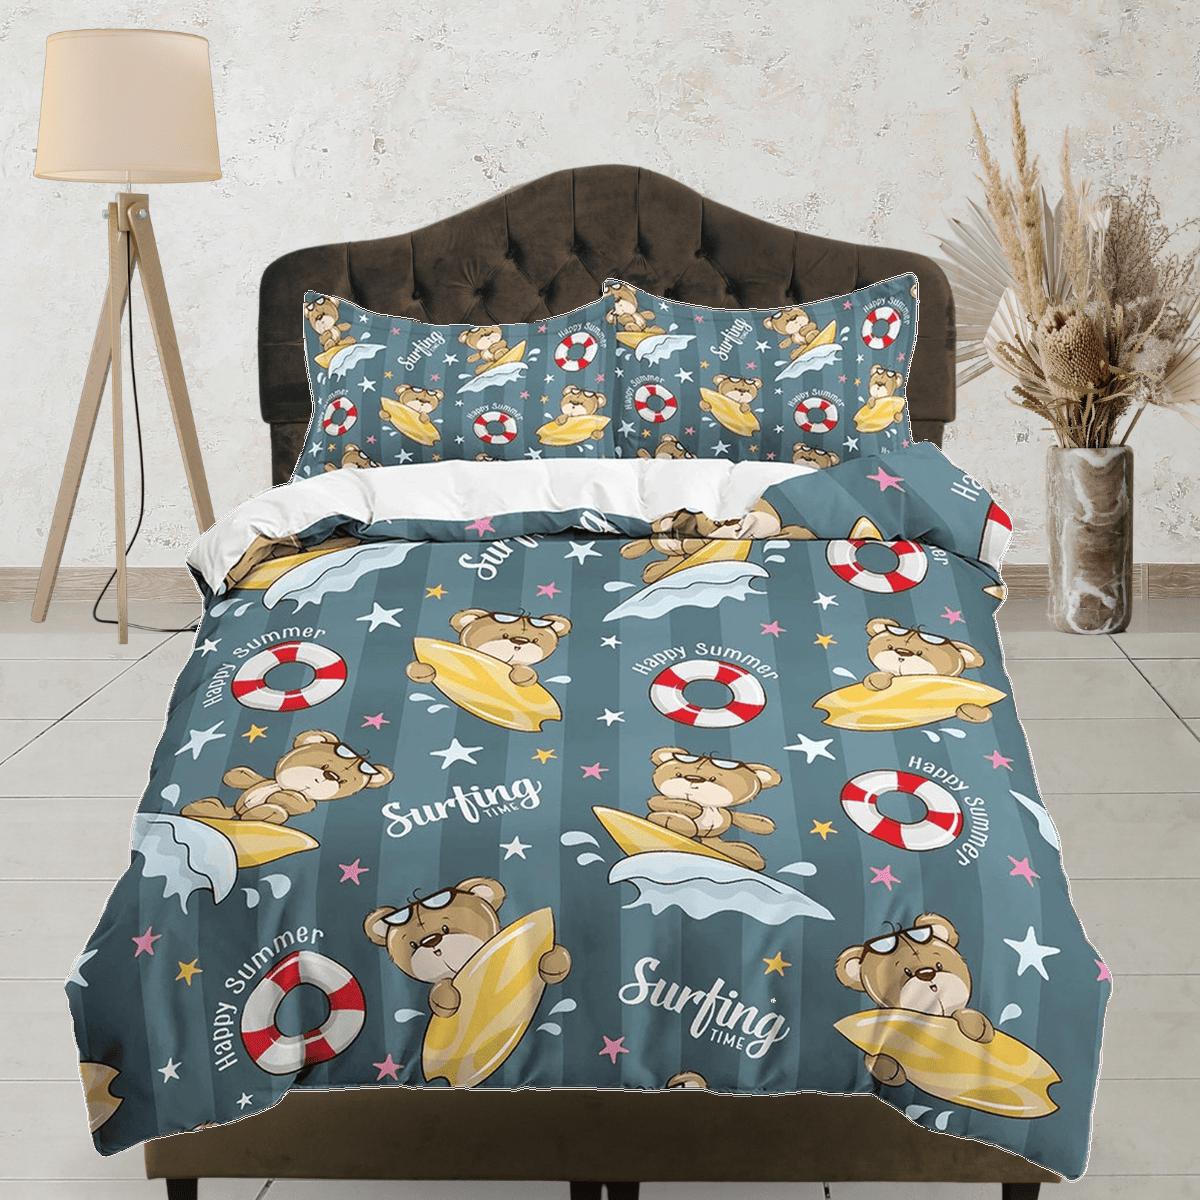 daintyduvet Cute brown teddy bear surfing toddler bedding, unique duvet cover, crib bedding with pillowcase, baby zipper bedding, king queen full twin